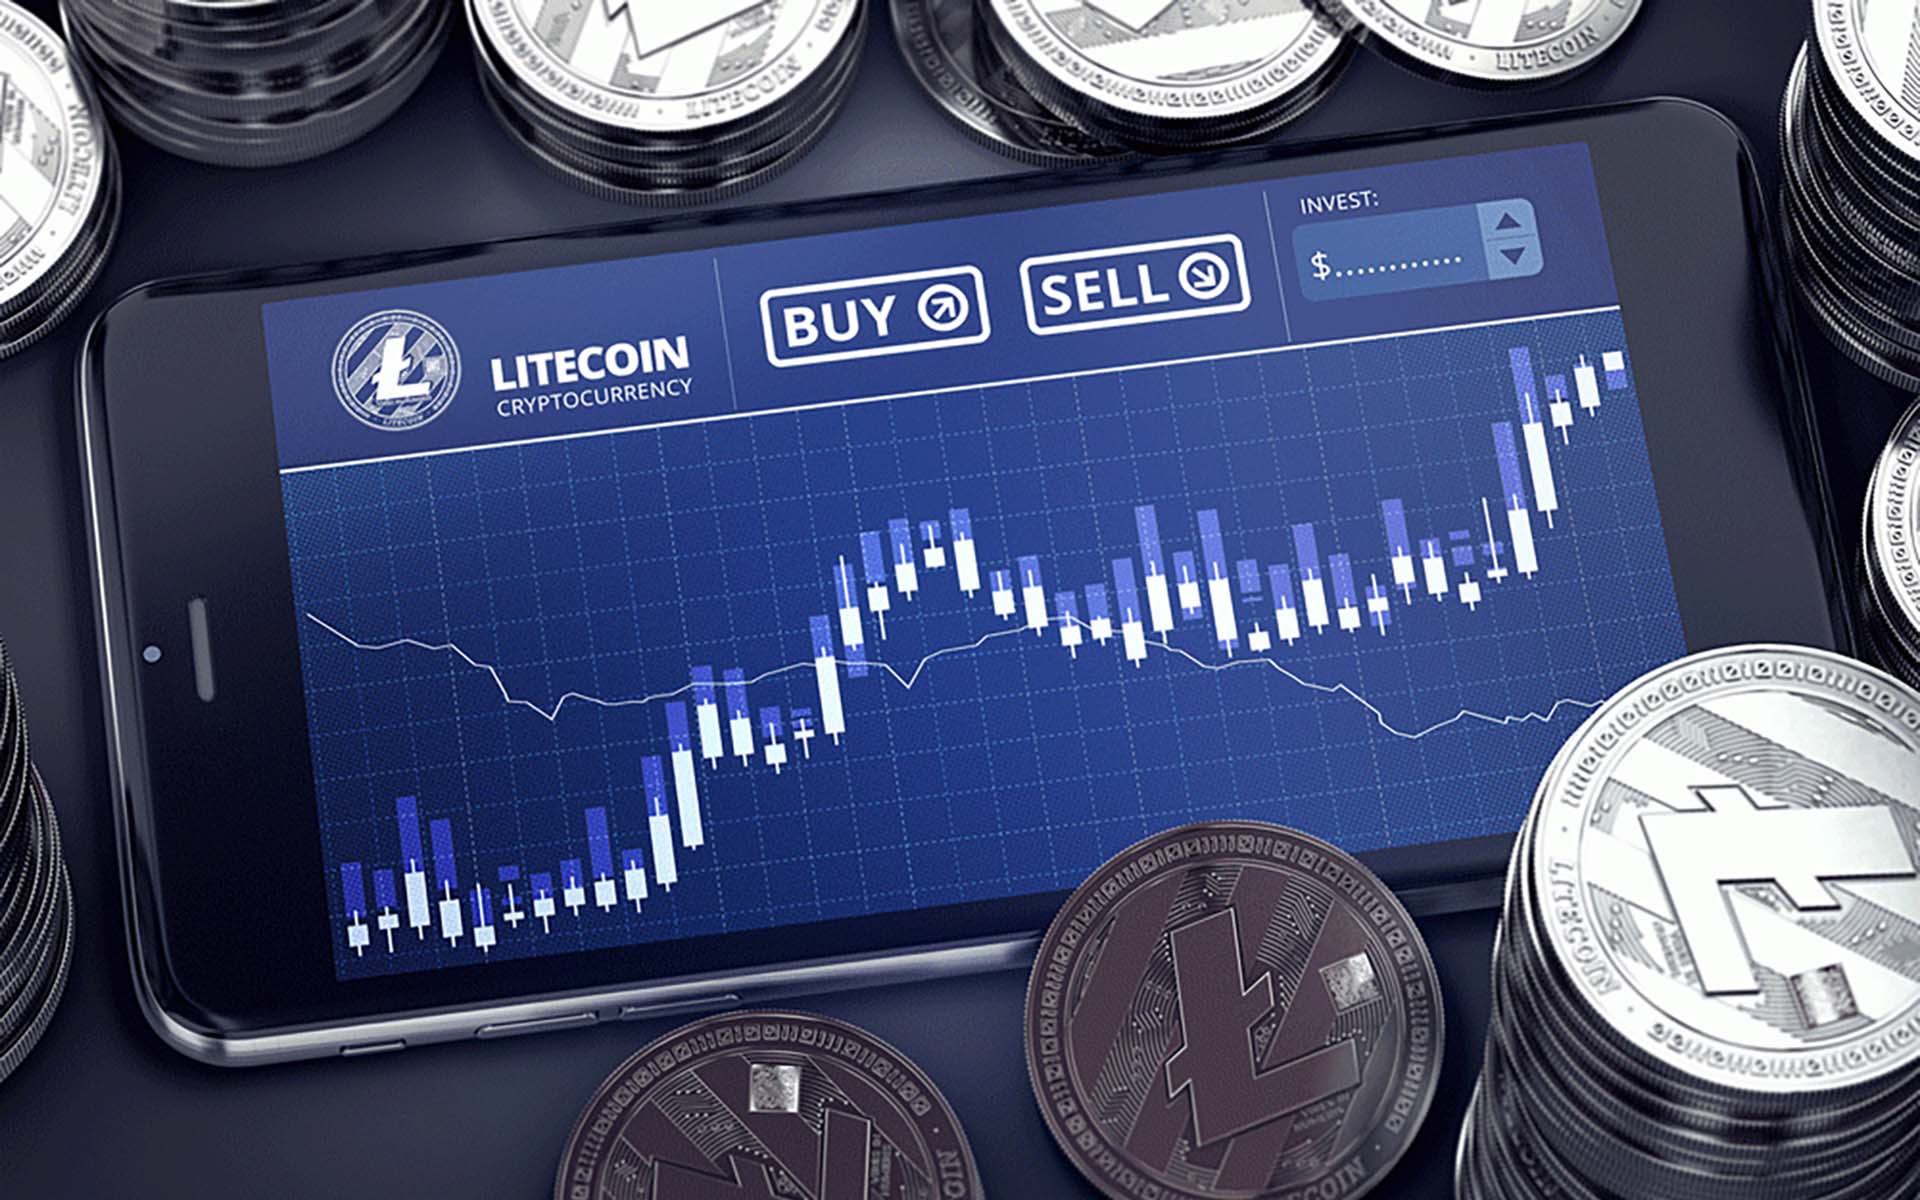 Litecoin Founder Lee: I Sold 100% Of My Litecoin Holdings